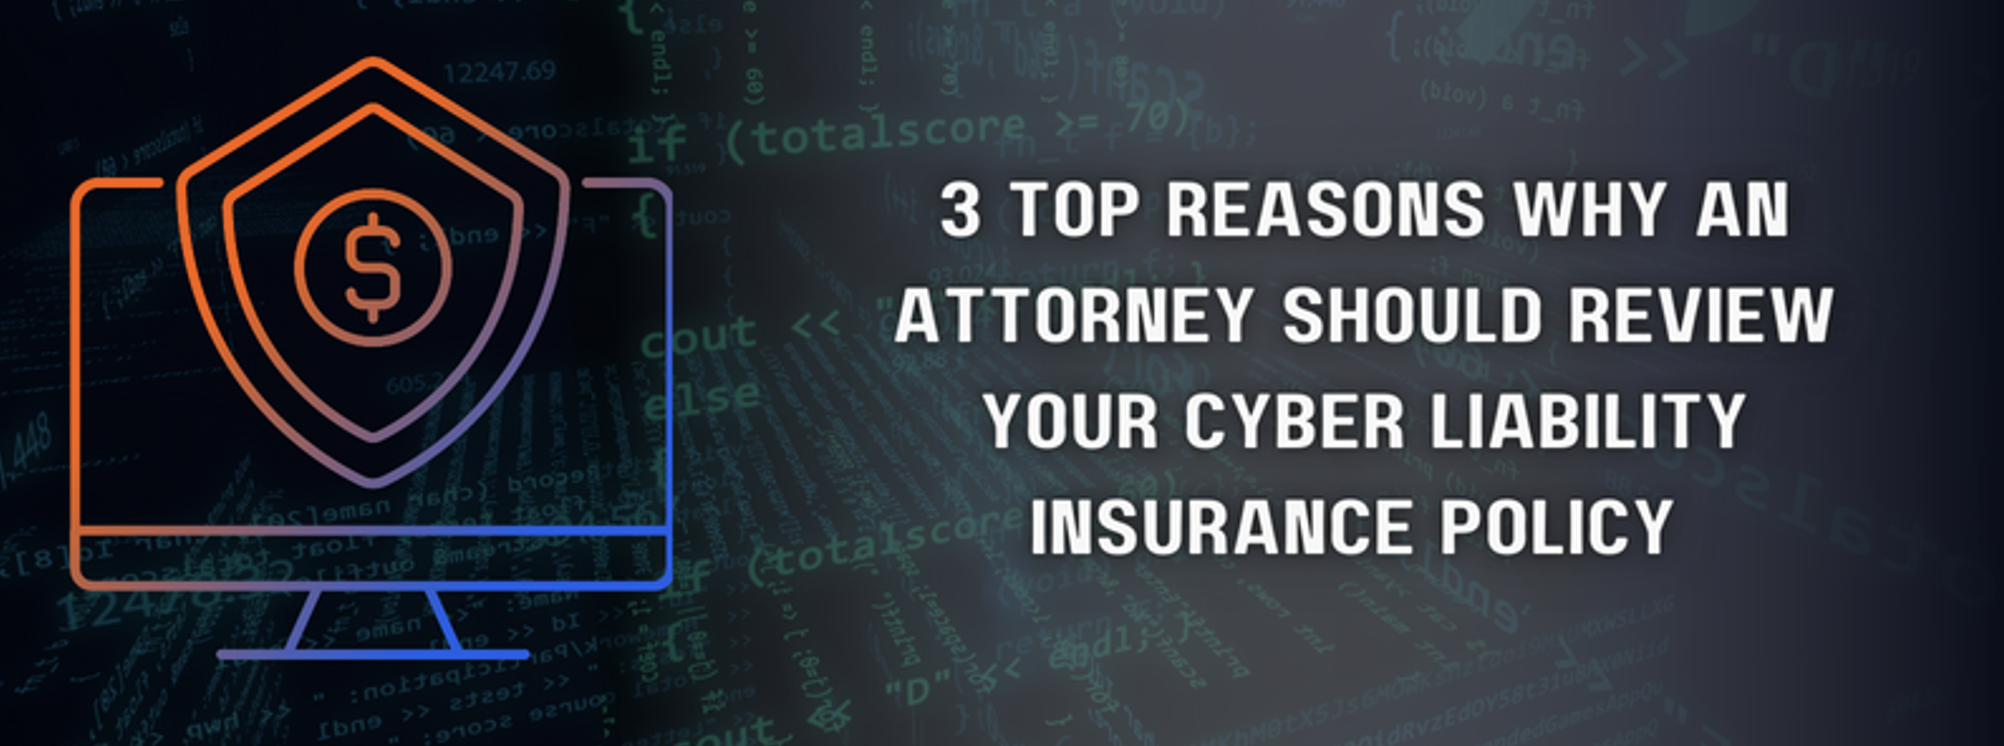 3 Top Reasons Why an Attorney Should Review Your Cyber Liability Insurance Policy